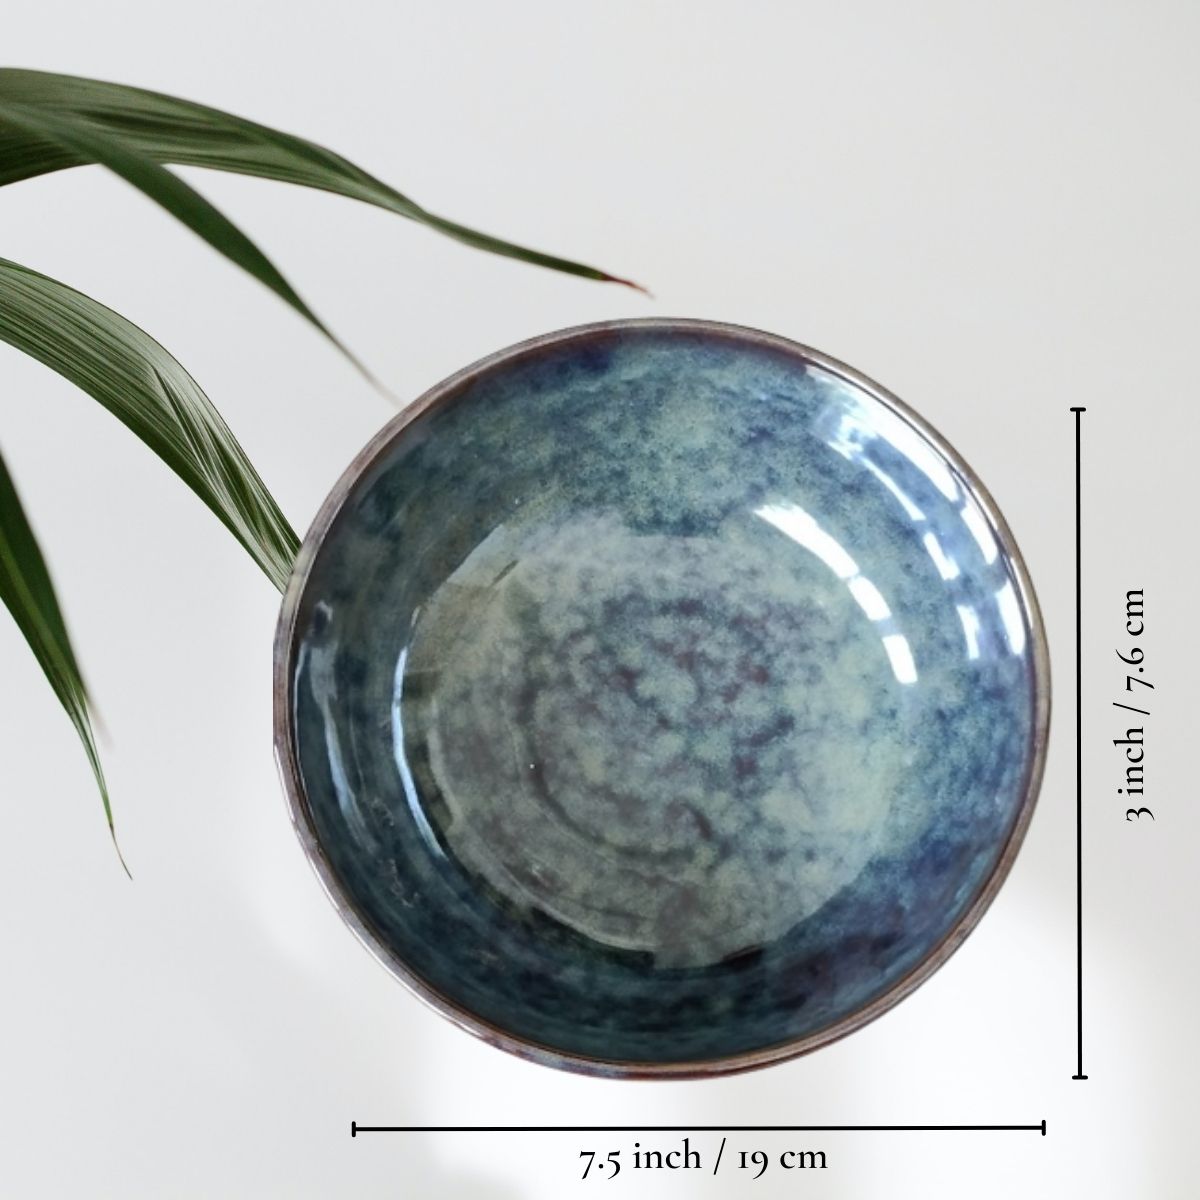 Ceramic Salad Bowl- Salad Plate- Serving Snacks Plate - Set of 3- Different  Sizes (5.5 inch, 6.5 inch, 7.5 inch), Blue Flower Pattern, Flat Serving